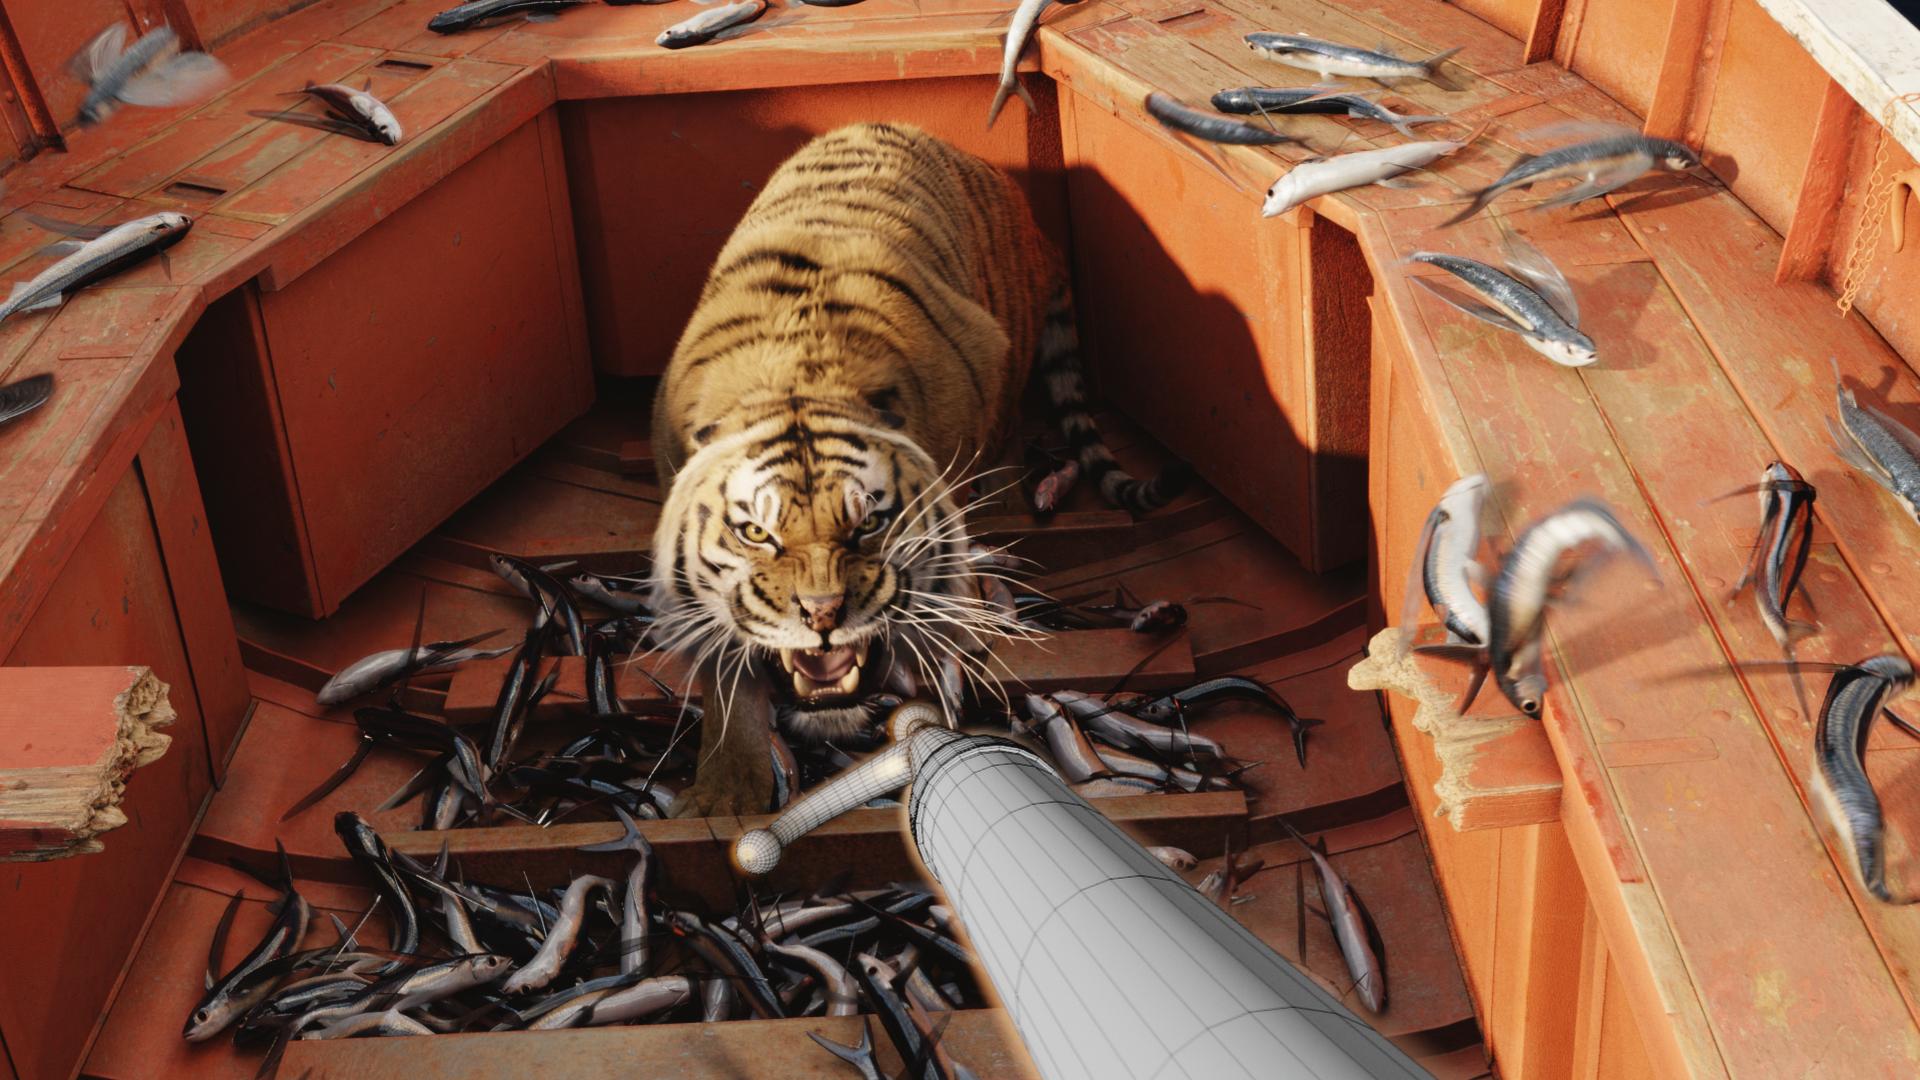 Life of Pi tiger nearly drowned on set, report alleges, Action and  adventure films